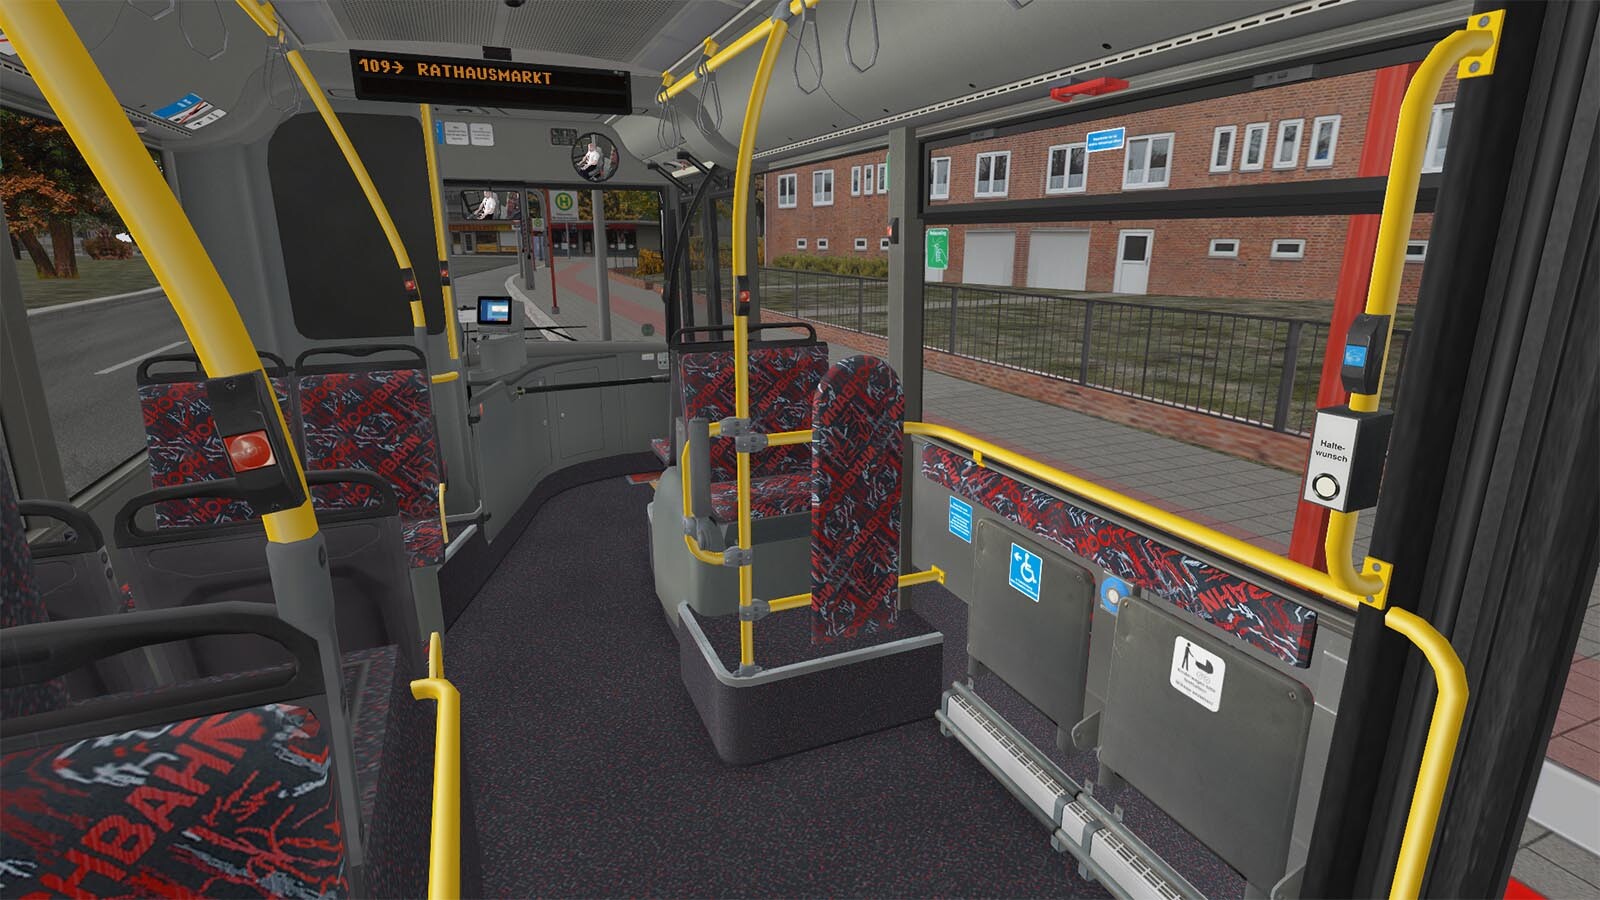 omsi 2 bus simulator system requirements